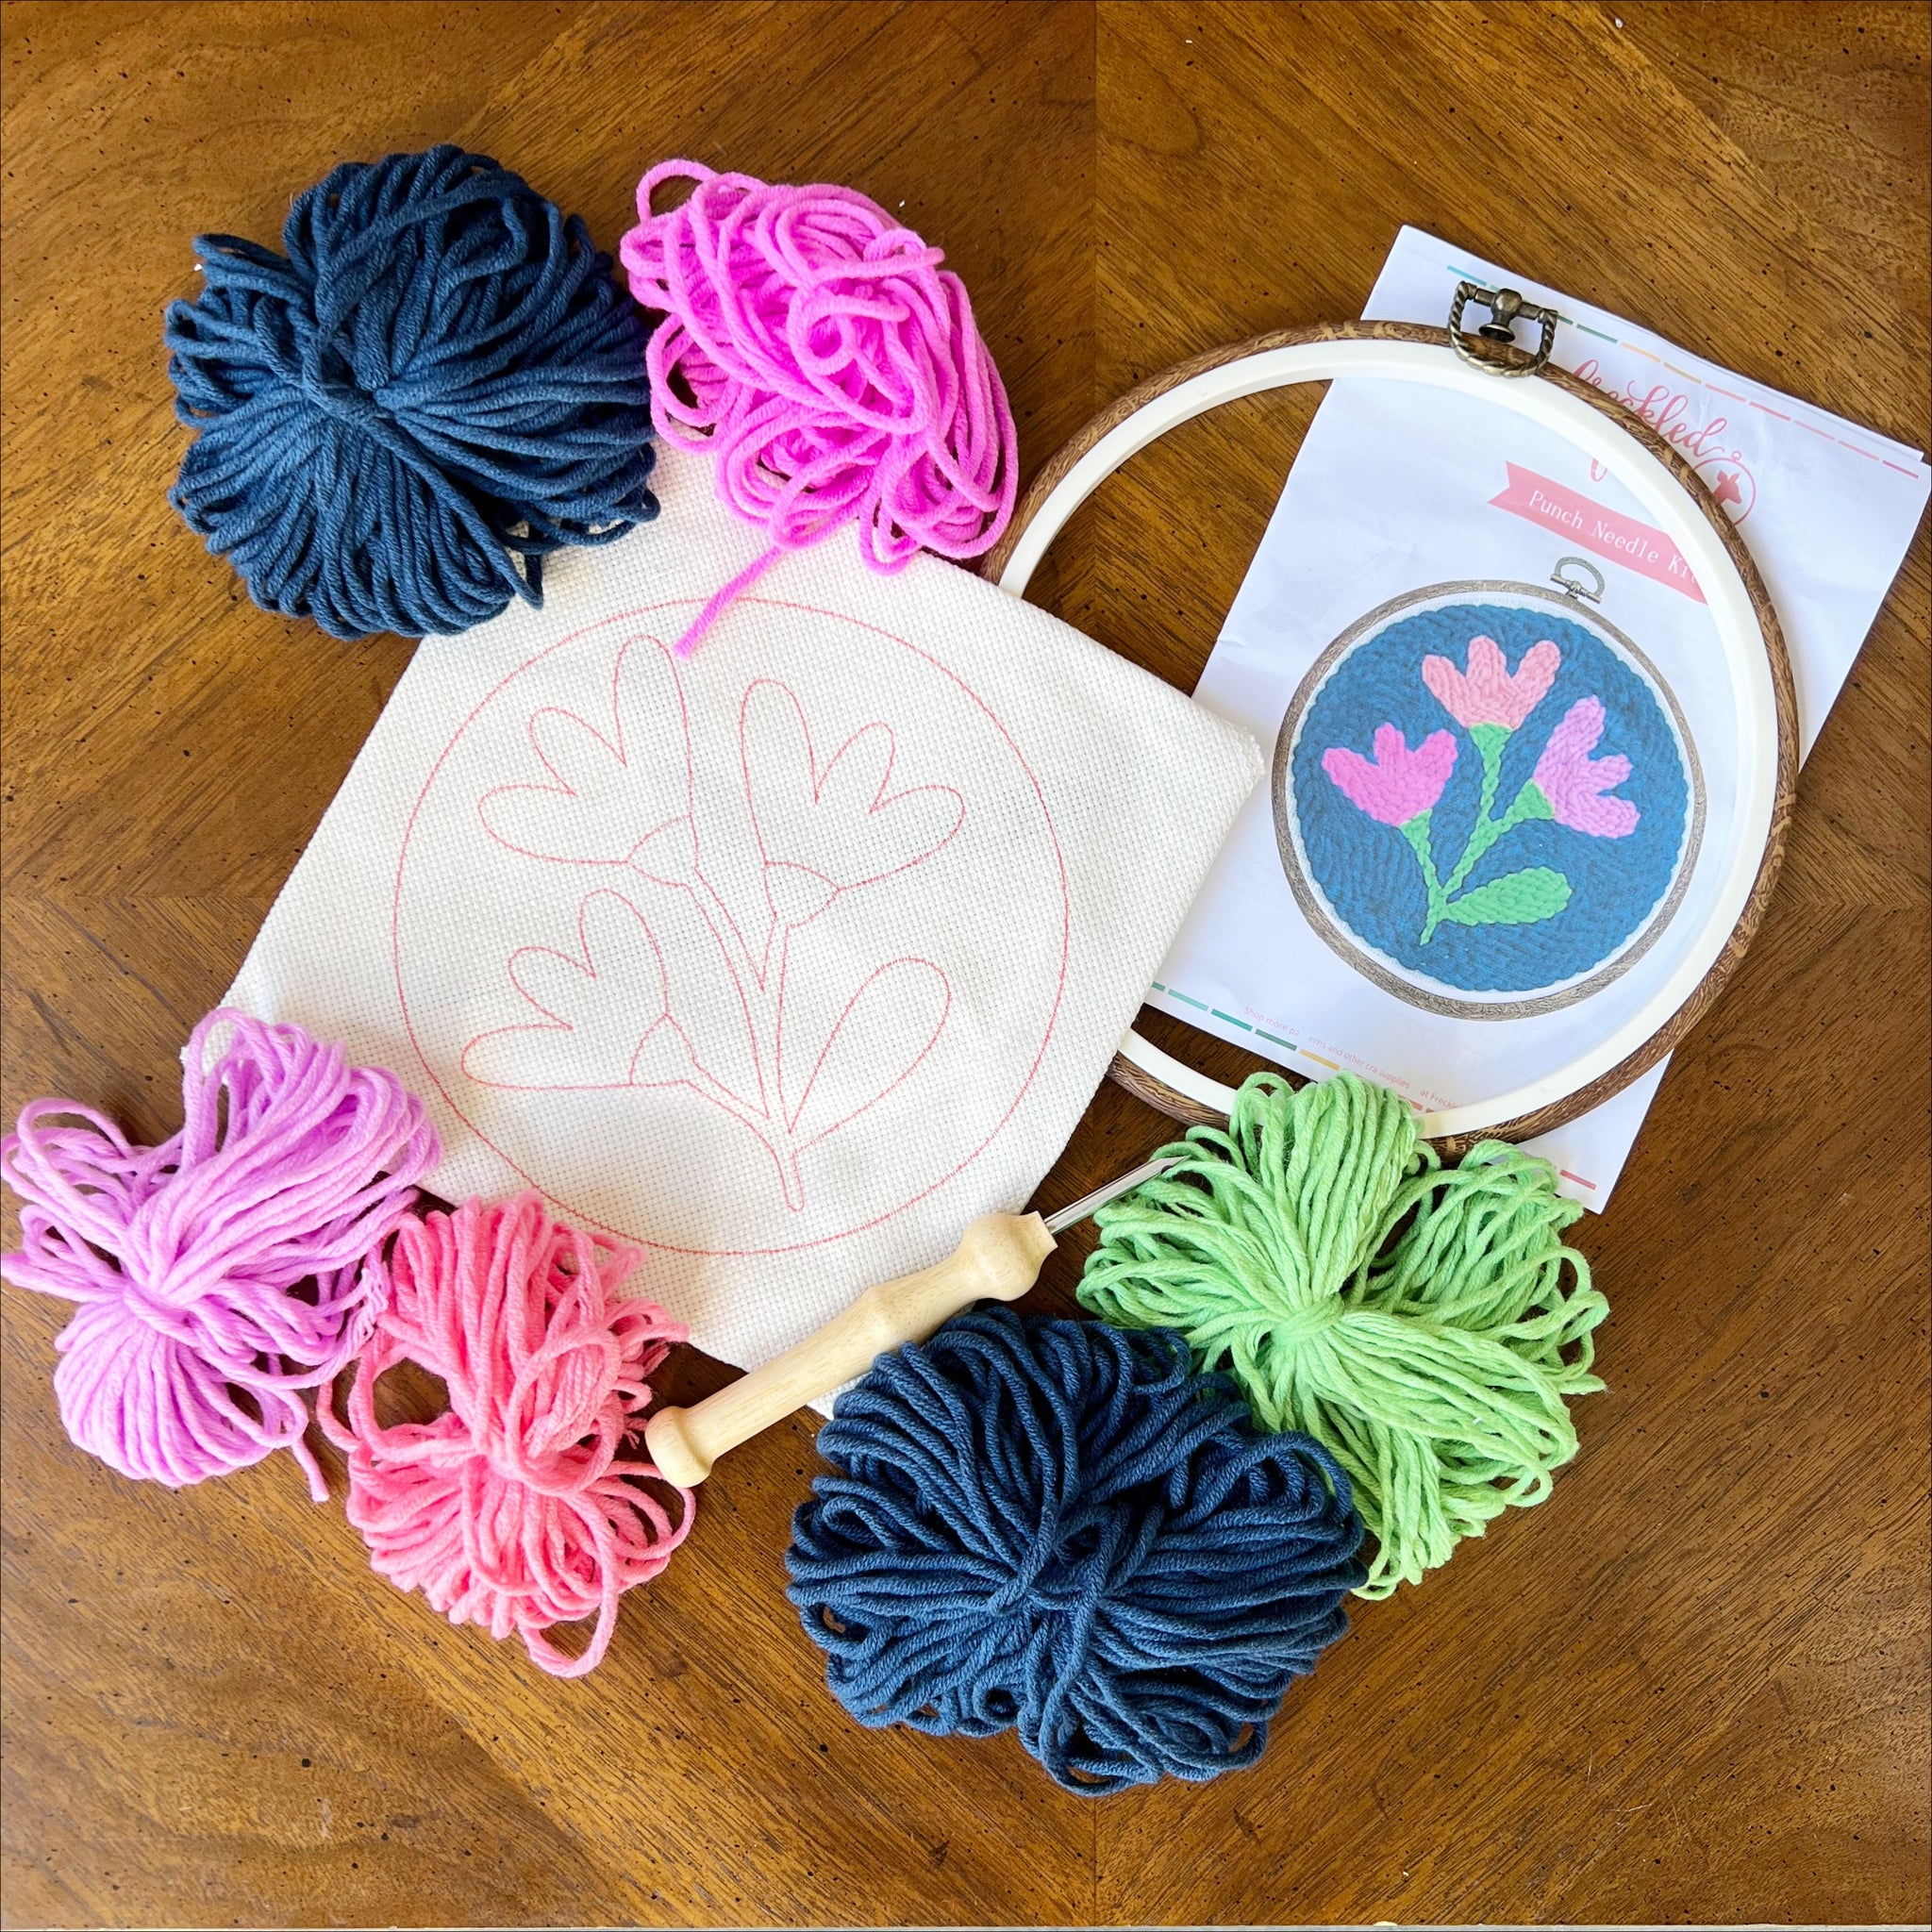 CHENISTORY DIY Punch Needle Embroidery Kit Flowers Rainbow Unique